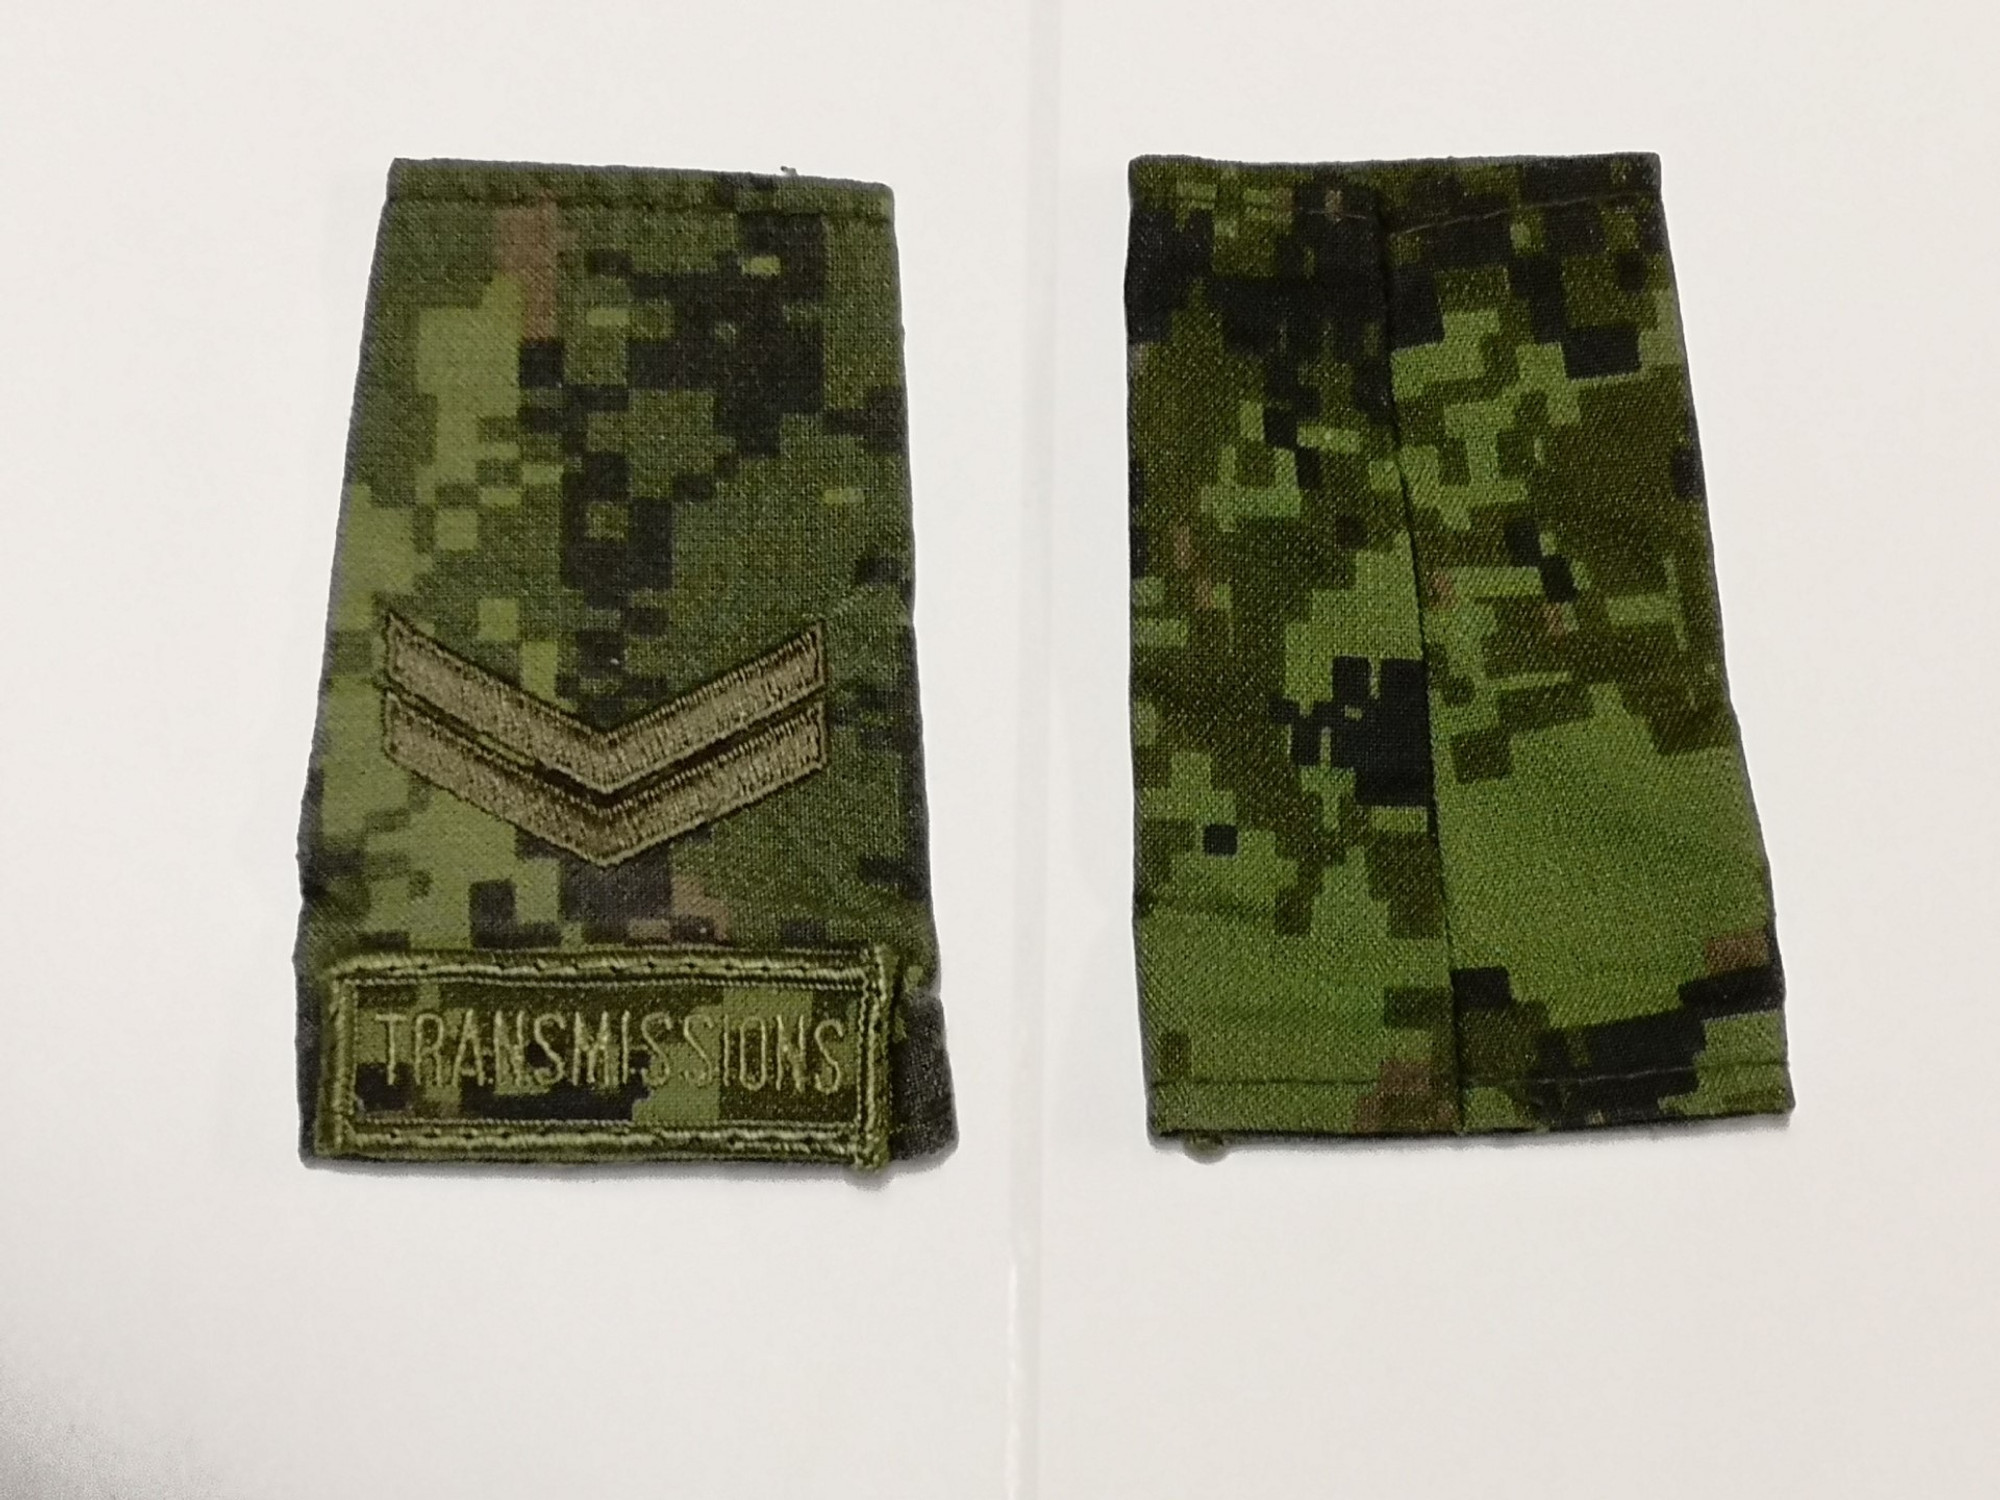 Canadian Armed Forces Cadpat Rank Epaulets Transmissions - Corporal